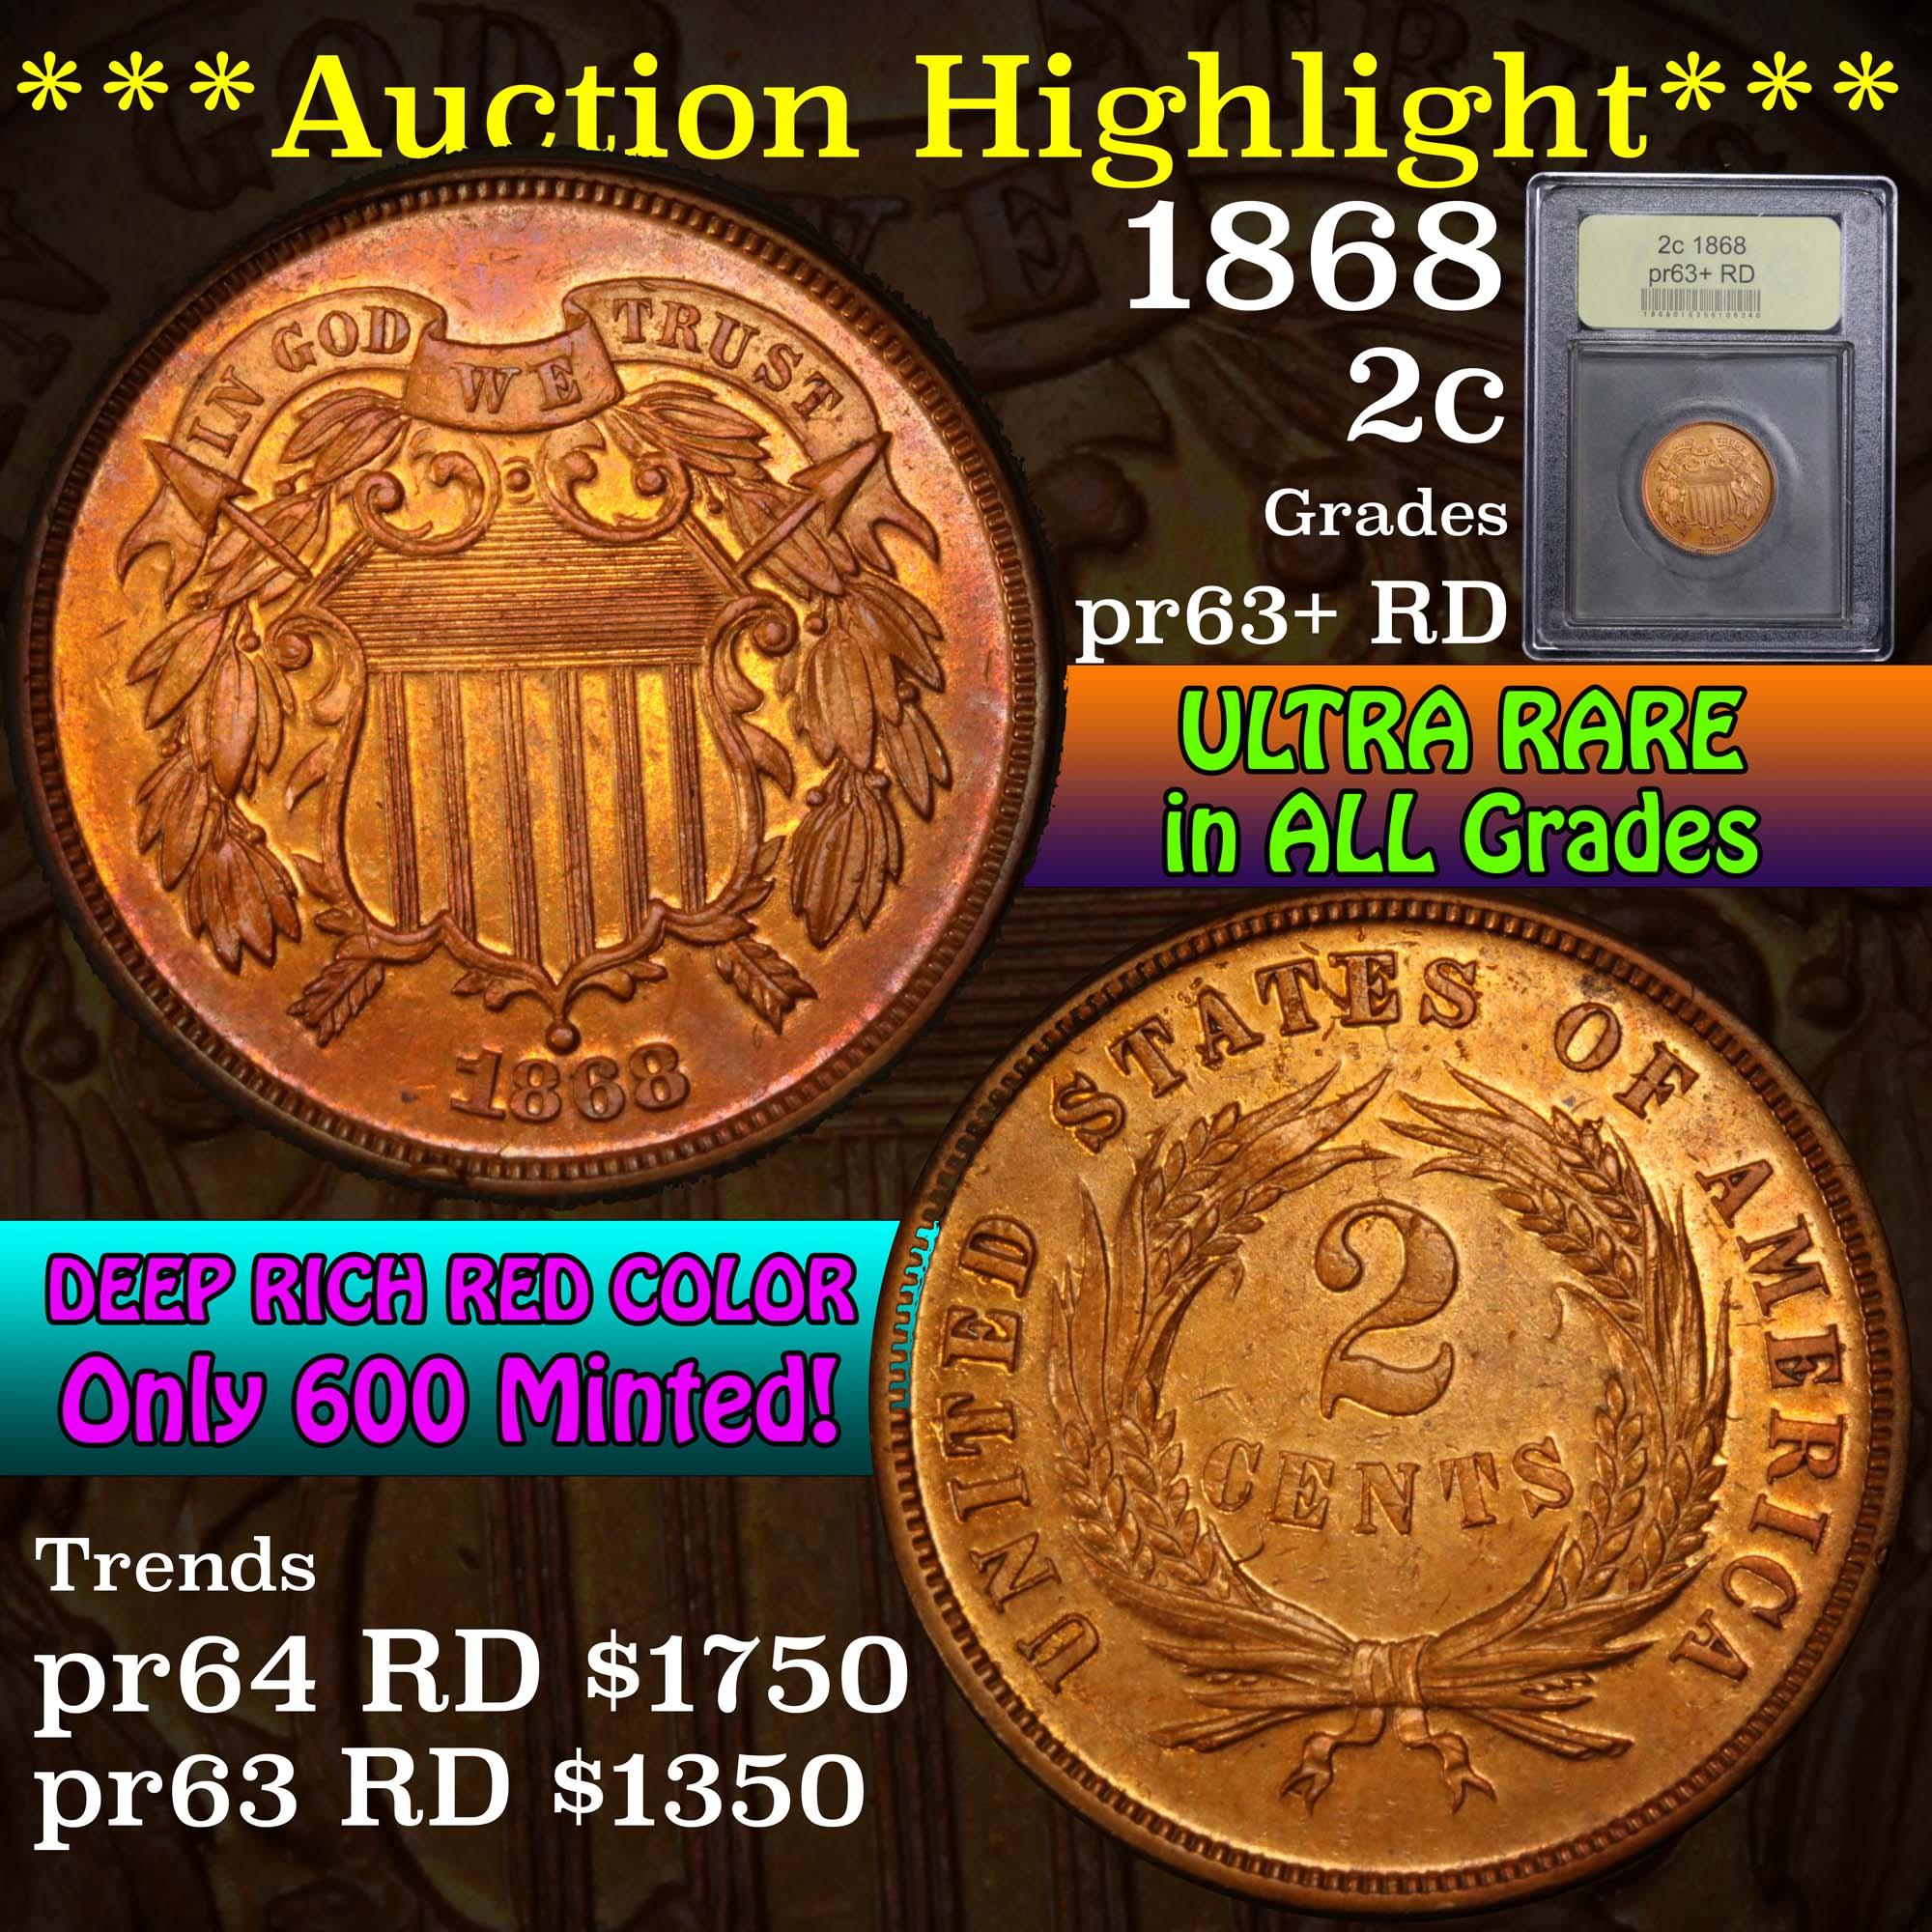 ***Auction Highlight*** 1868 Two Cent Piece 2c Graded Select+ proof RD by USCG (fc)